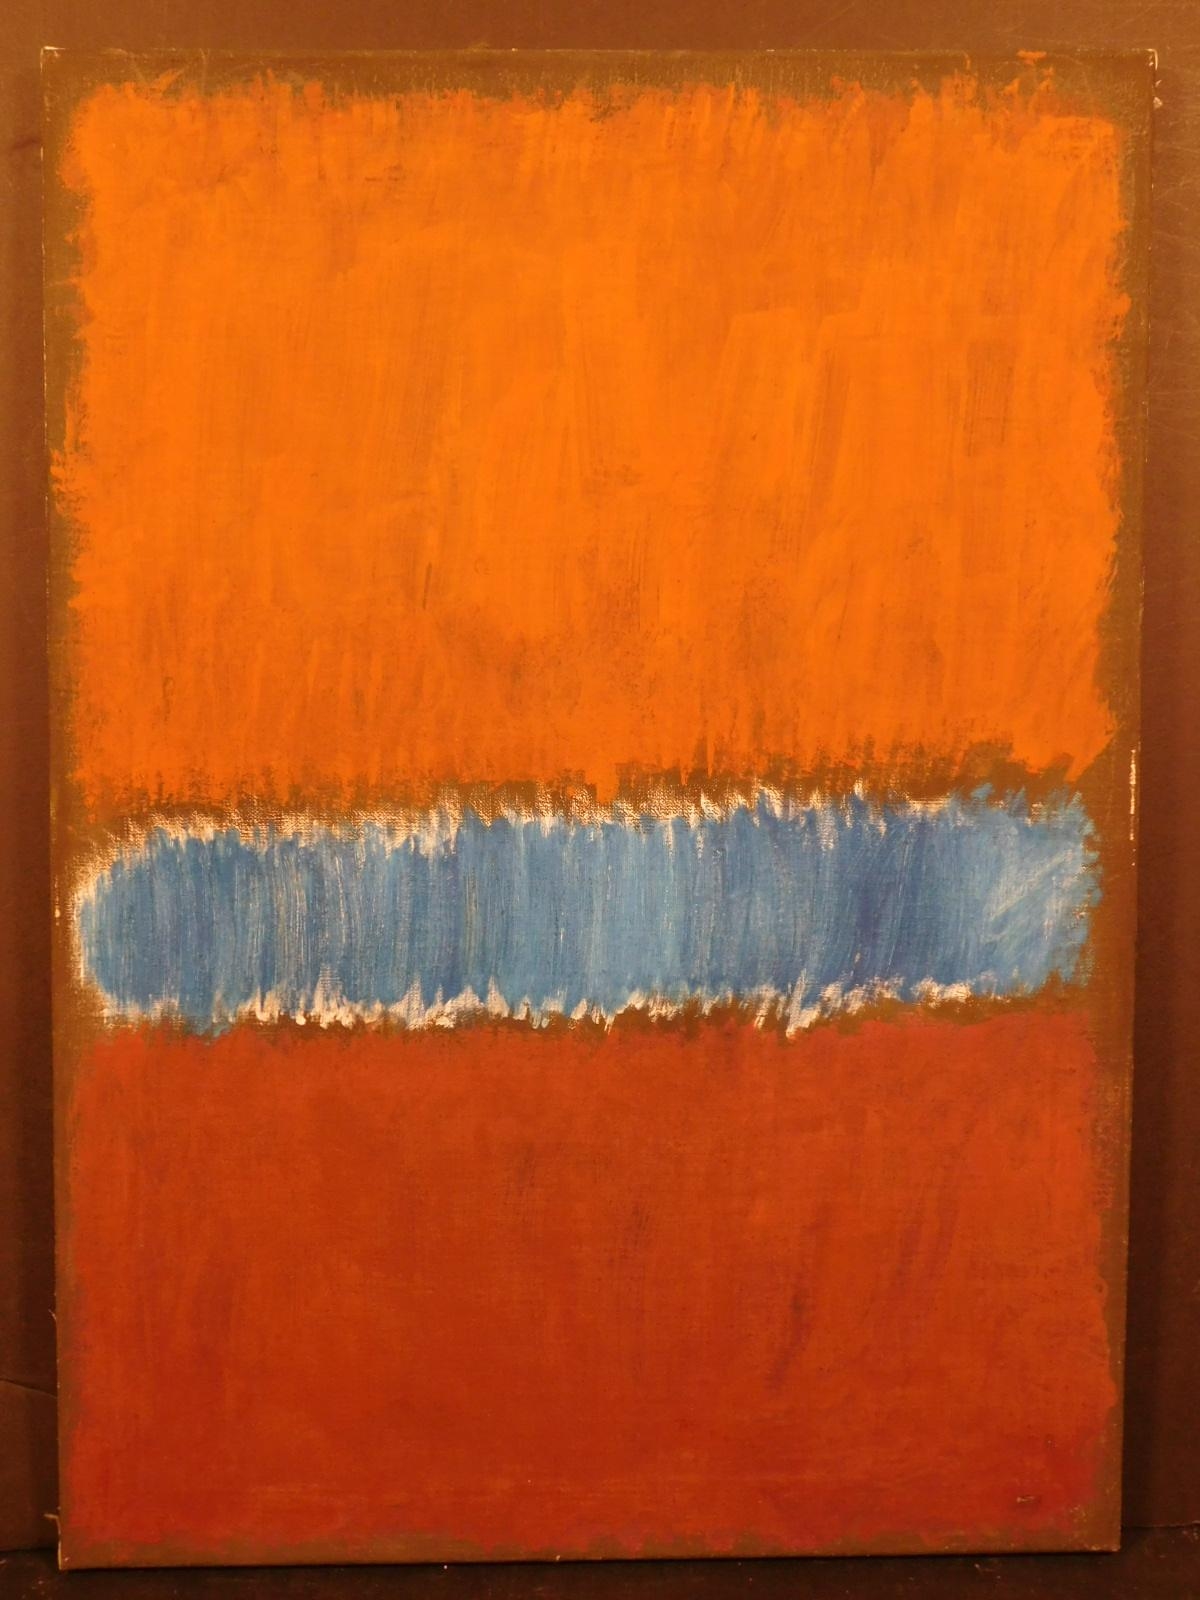 Color Field Painting by Mark Rothko, 1969